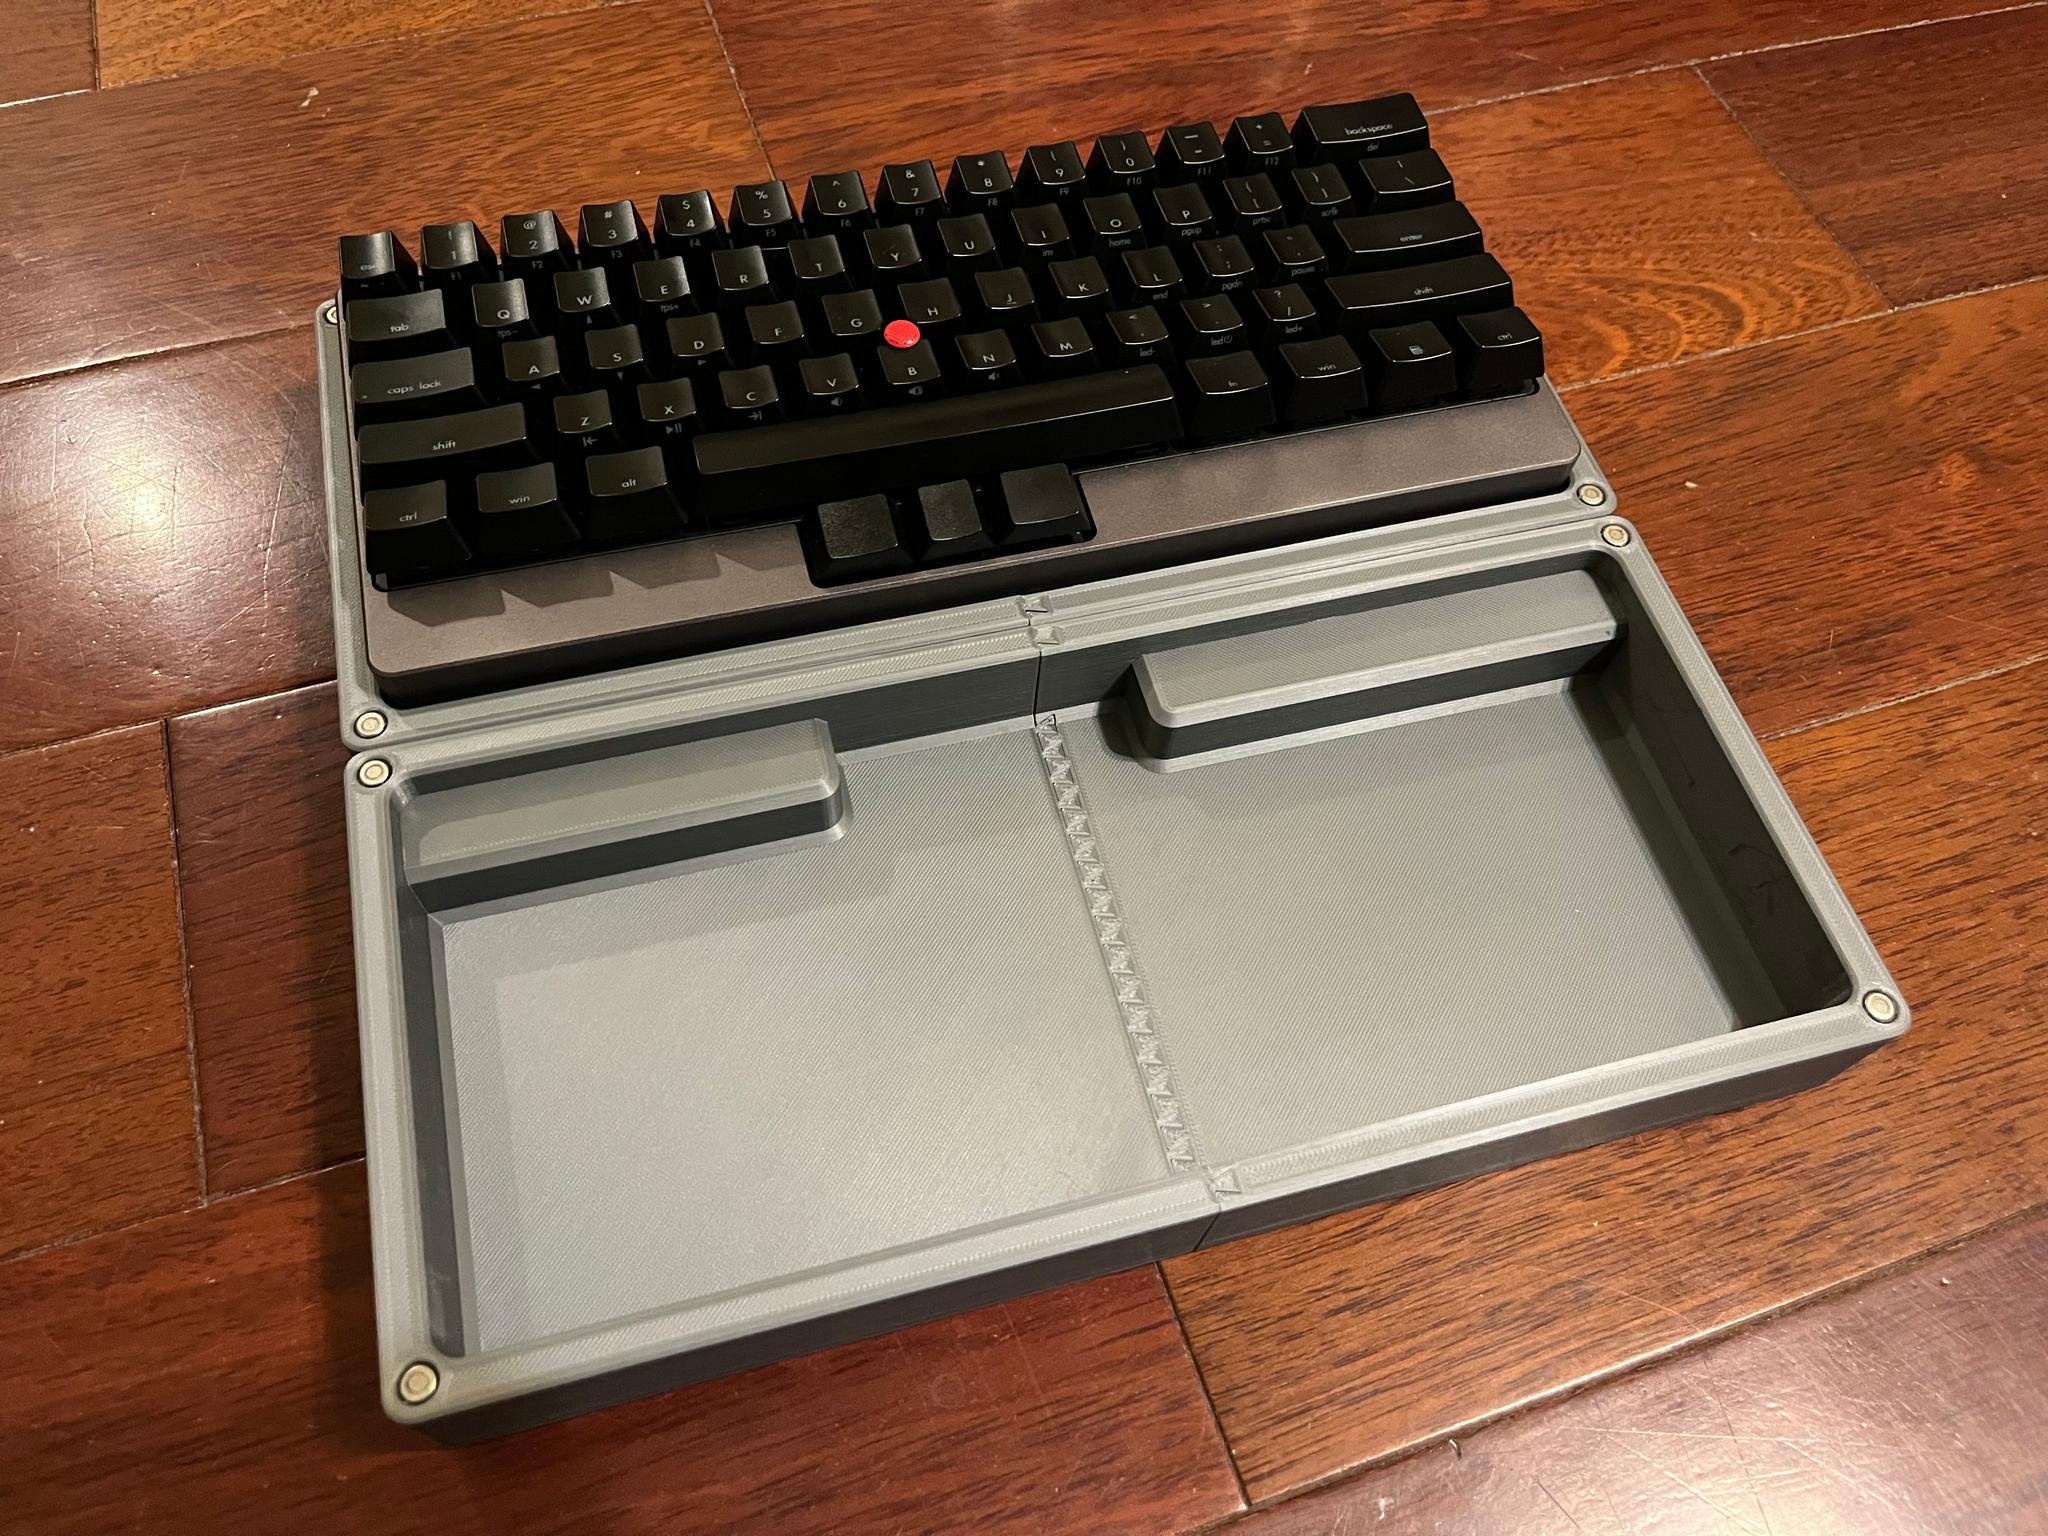 Case with keyboard and lid removed